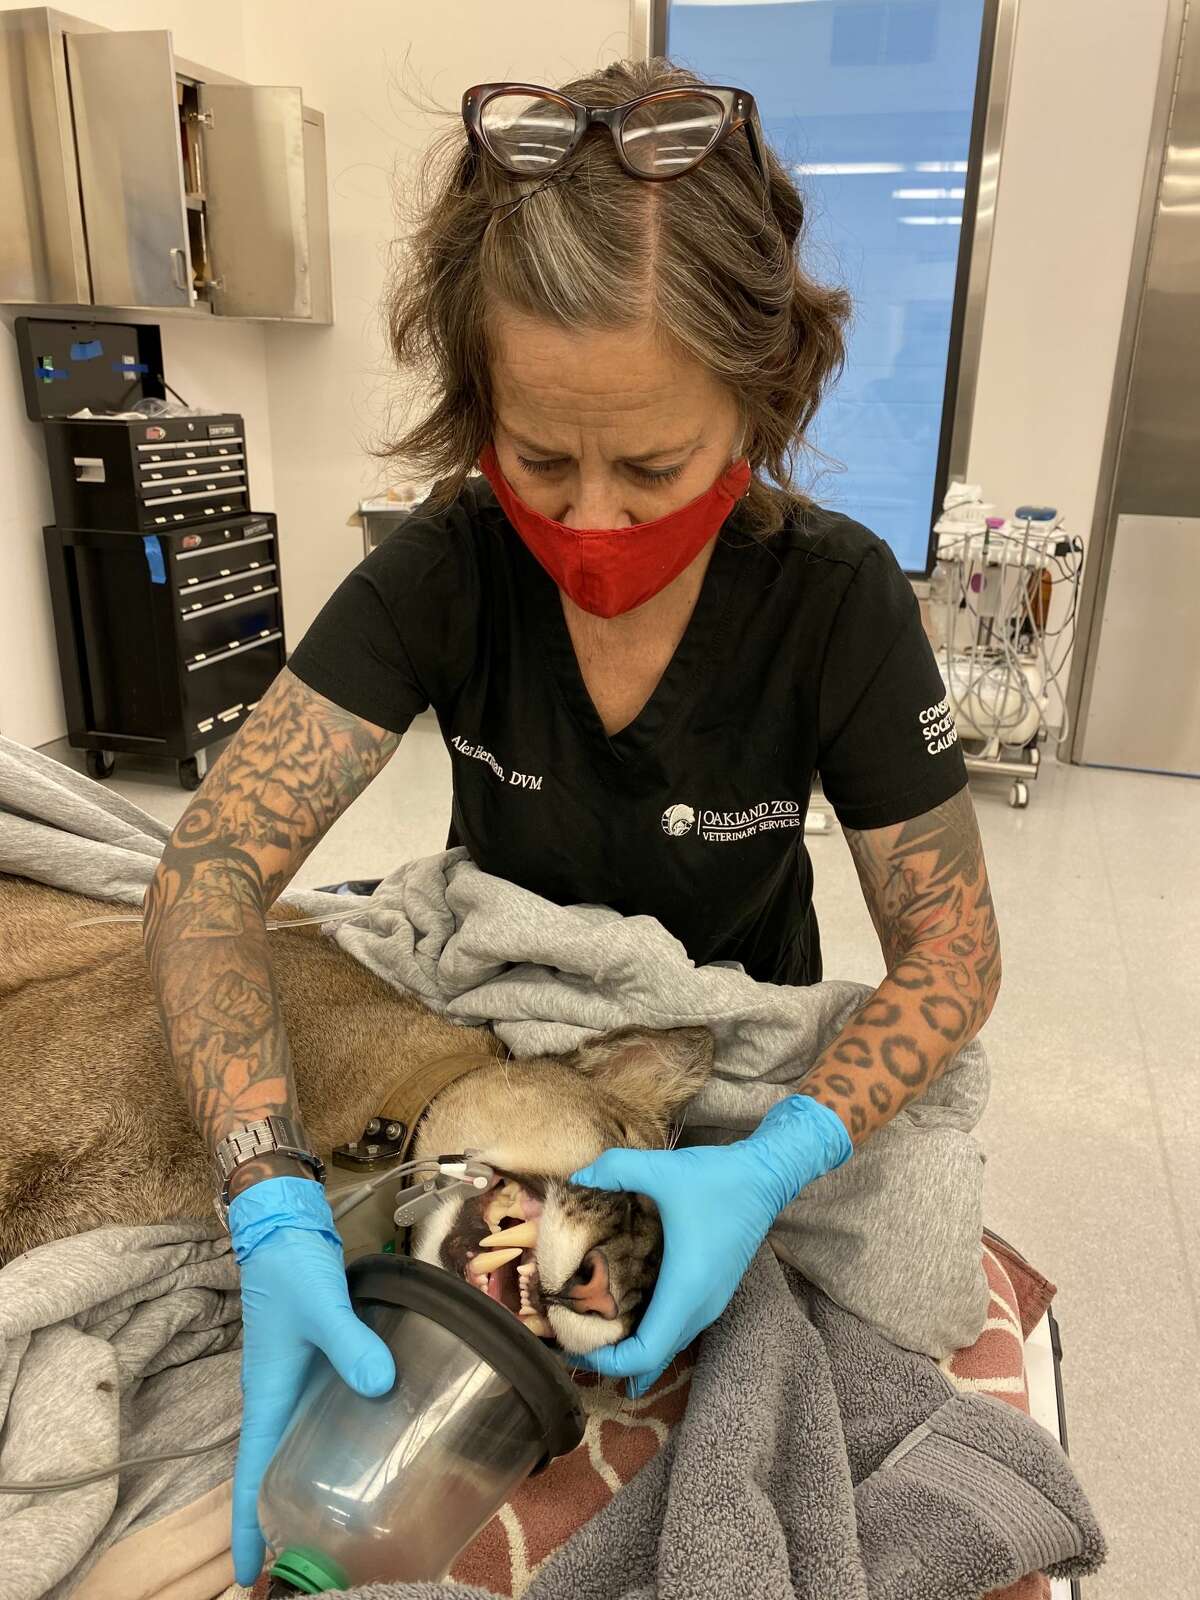 The mountain lion will be released back to the wild in an unpopulated area of Santa Clara County after he is examined Thursday.